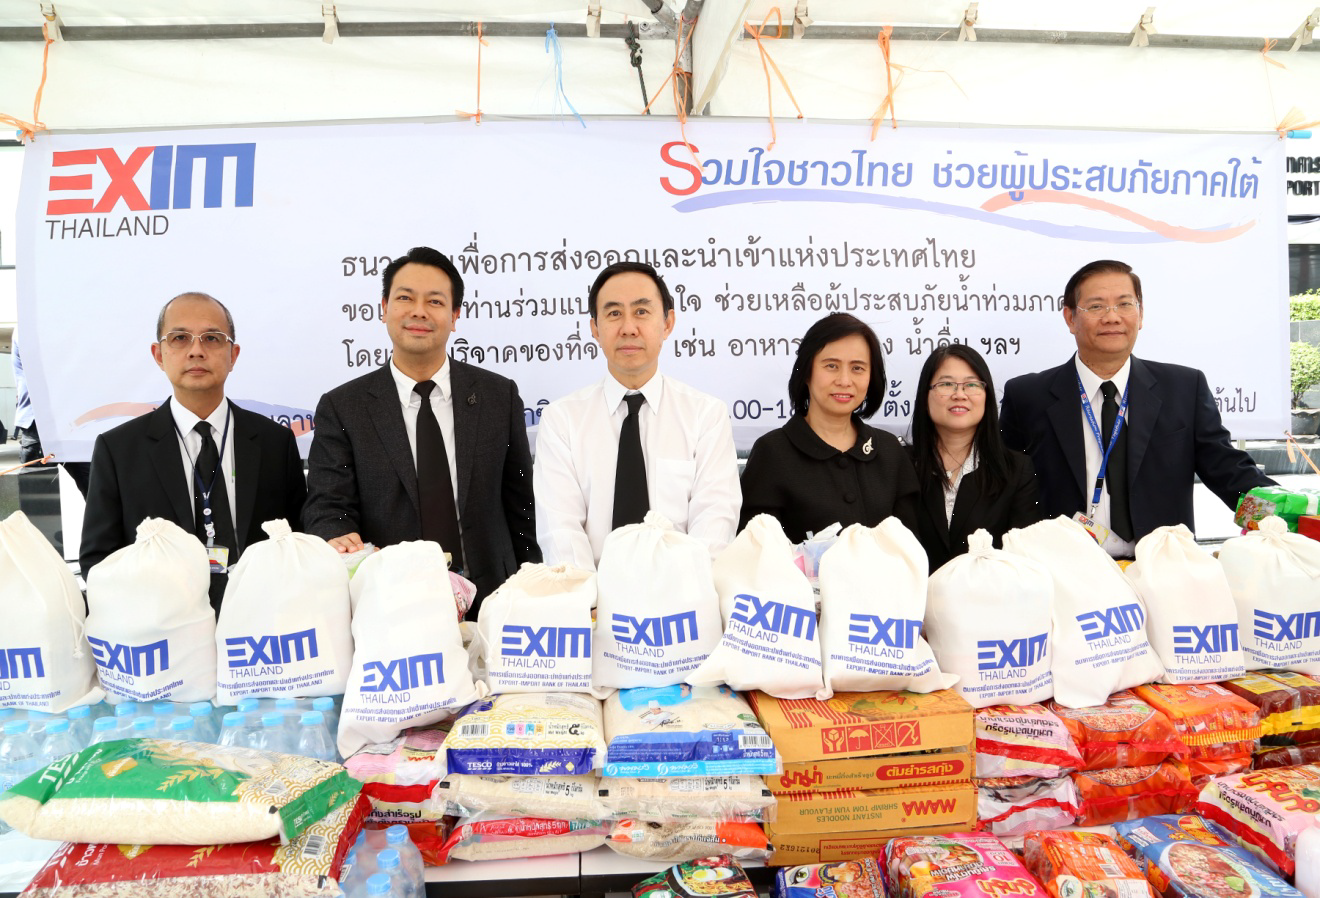 EXIM Thailand Provides Disaster Relief Bags and Donation to Southern Flood Victims